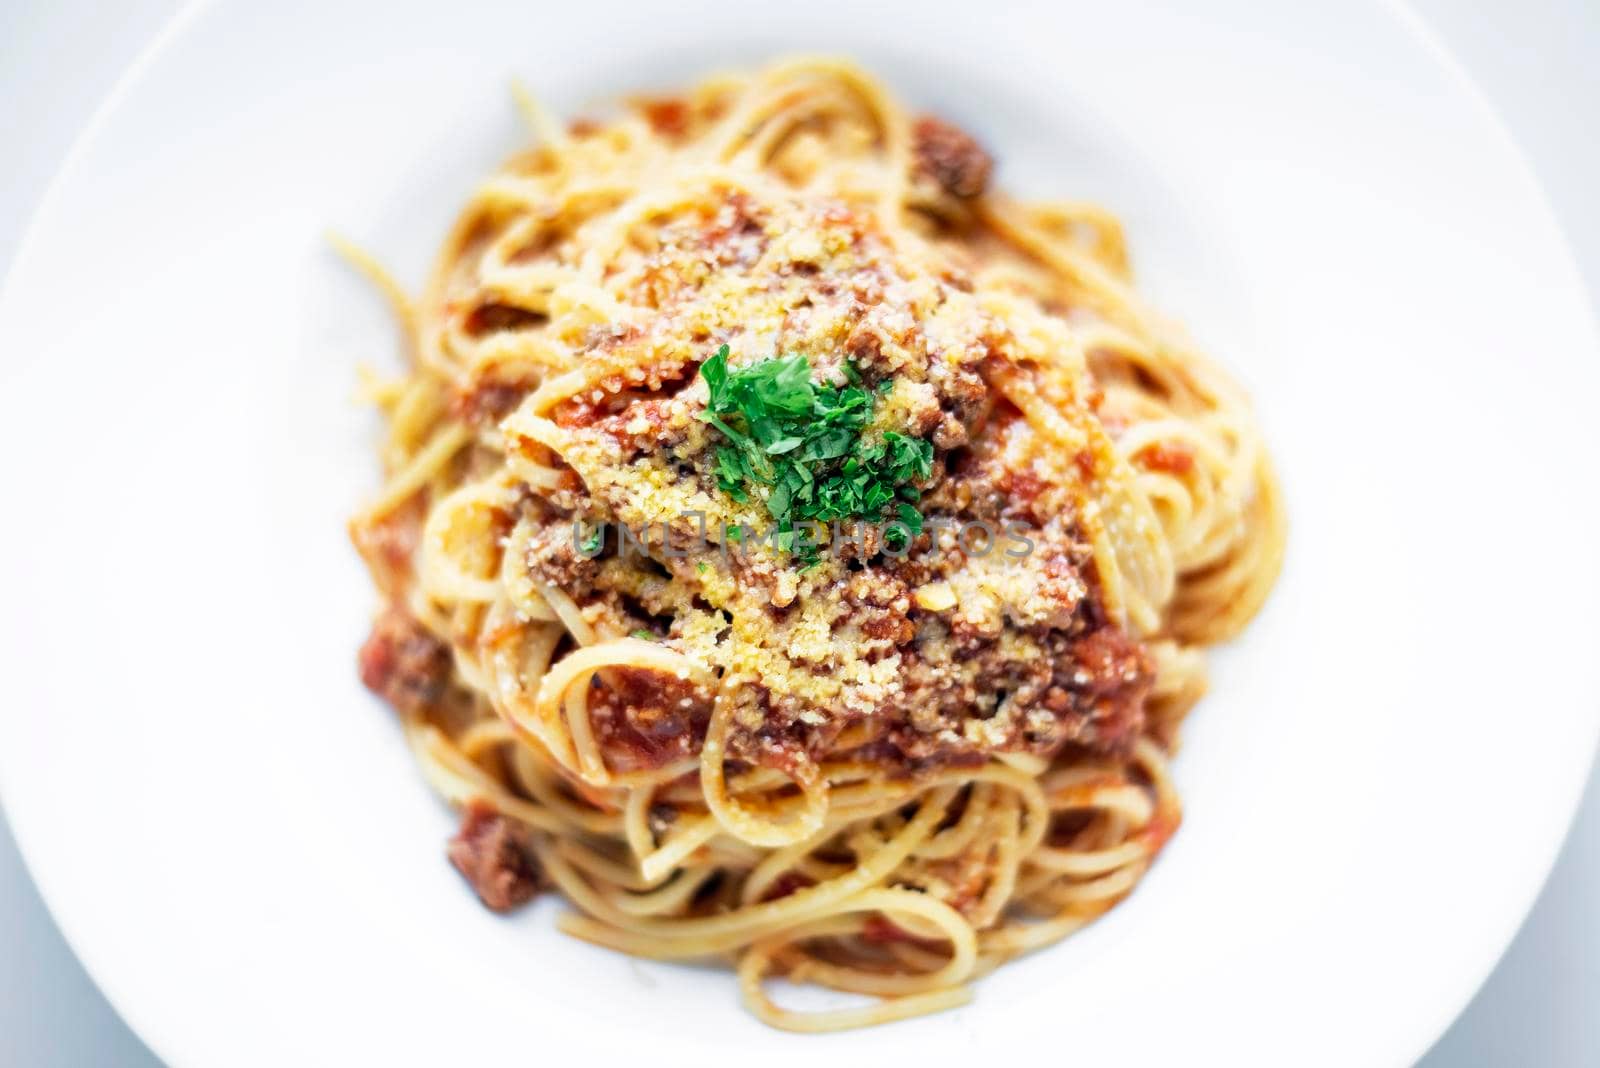 spaghetti pasta bolognaise with beef and tomato parmesan sauce by jackmalipan